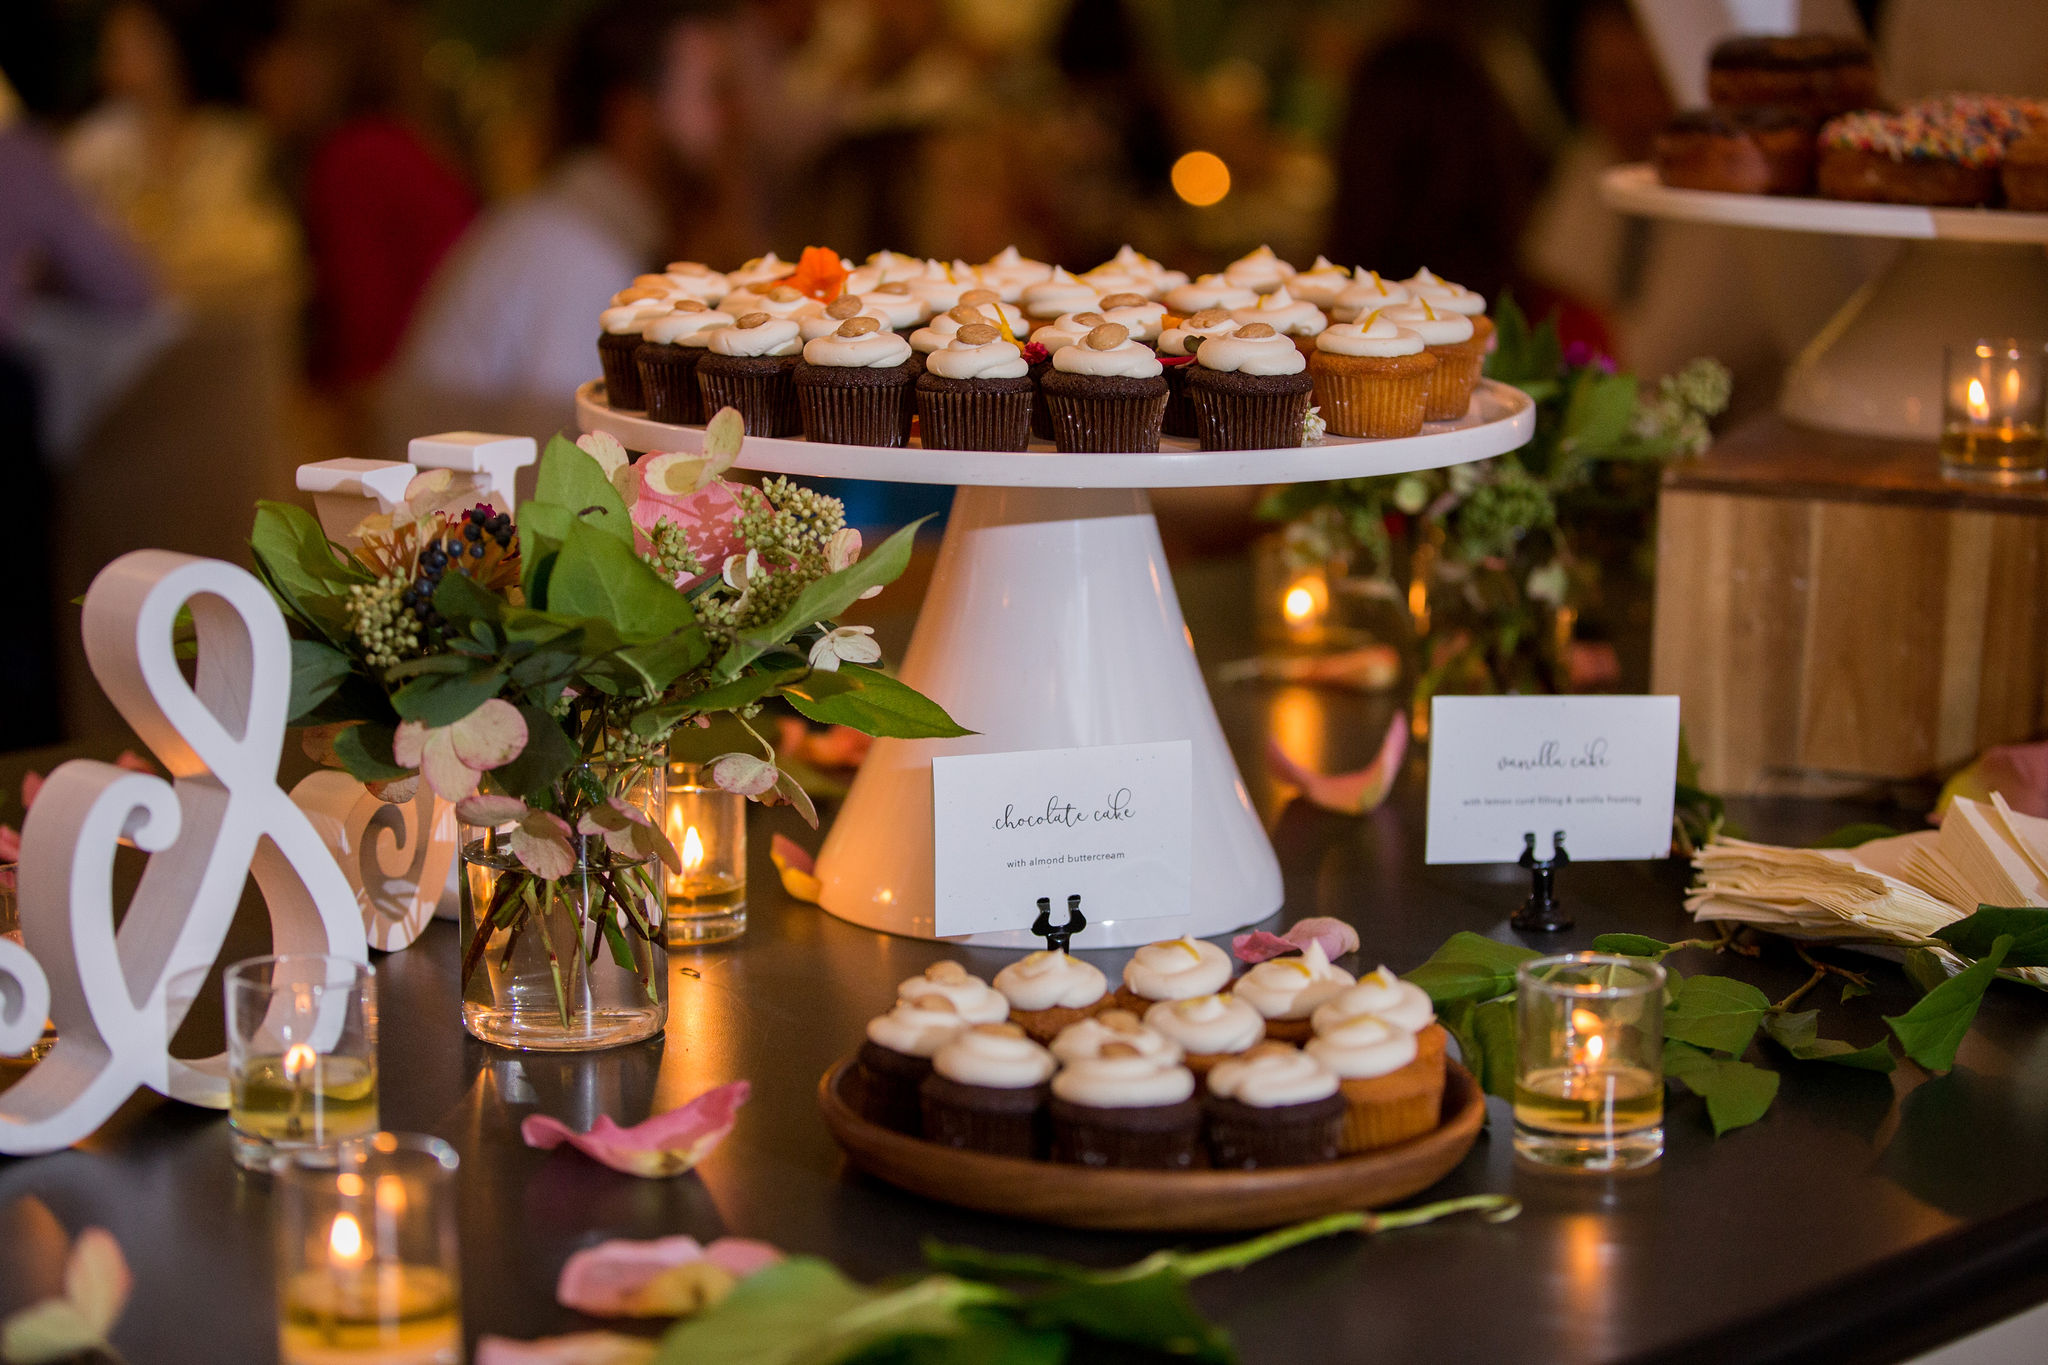 Greenhouse Loft summer wedding reception with small arrangements of pink garden roses, votive candles, and cupcakes.